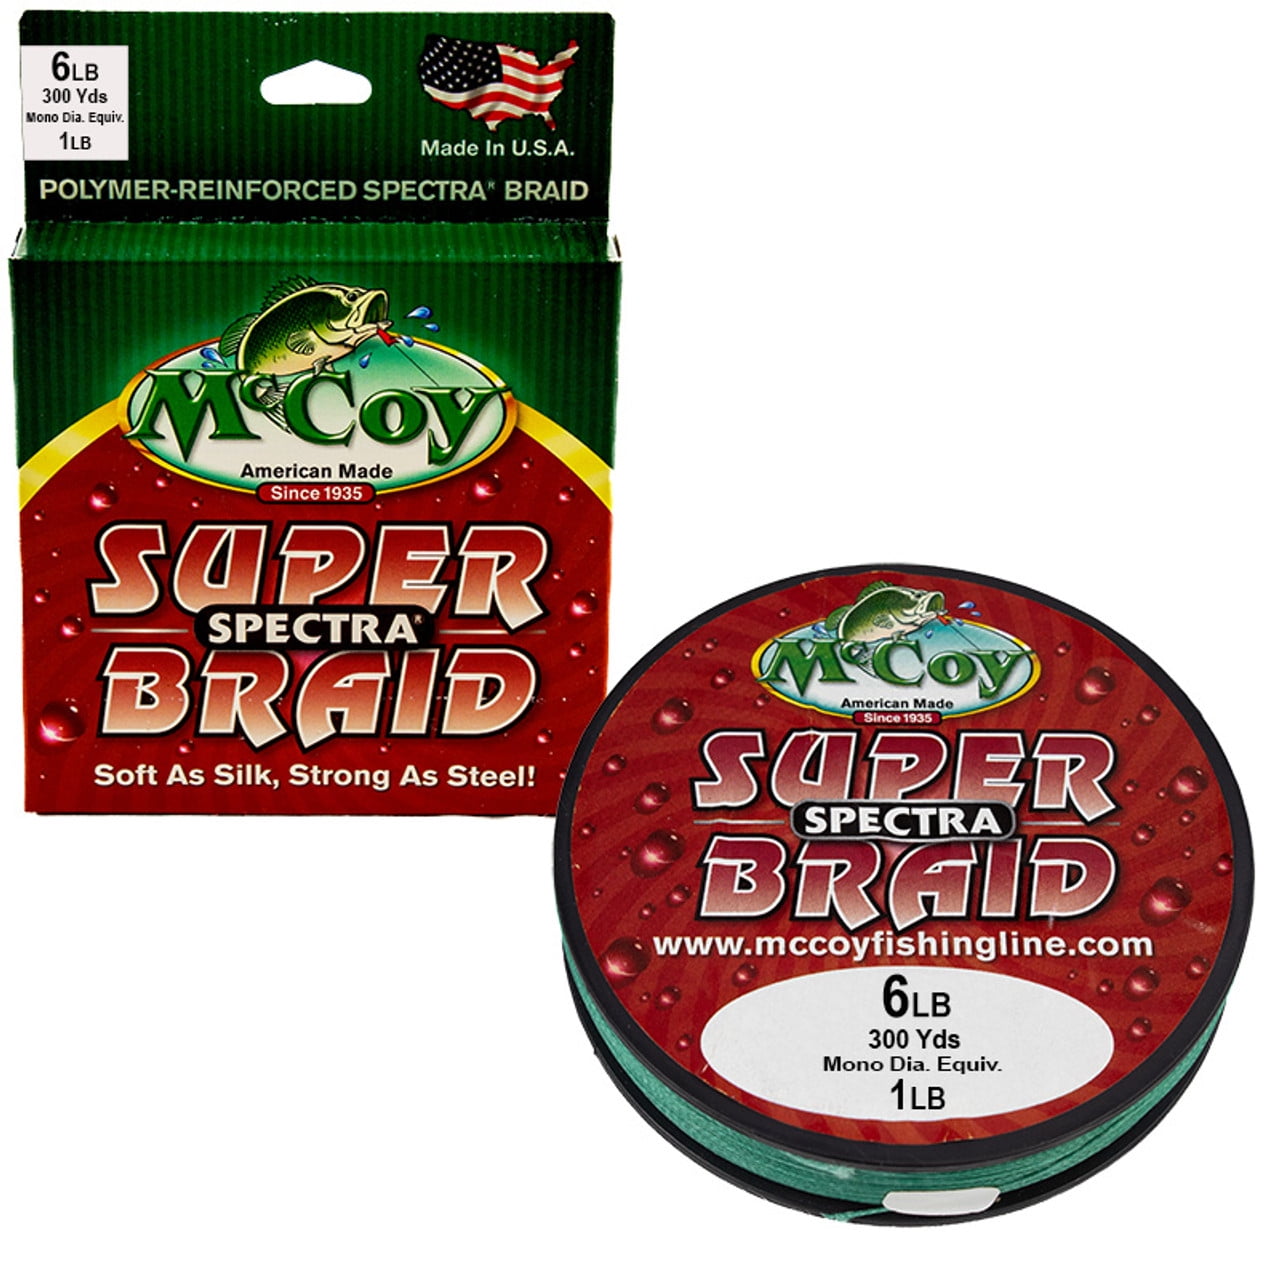 Mccoy Super Spectra Braid Mean Green Premium Tight Weave Braided Fishing Line (6lb Test (.005 inch Dia) - 300 Yards), Size: 6lb Test (.005 Dia) - 300